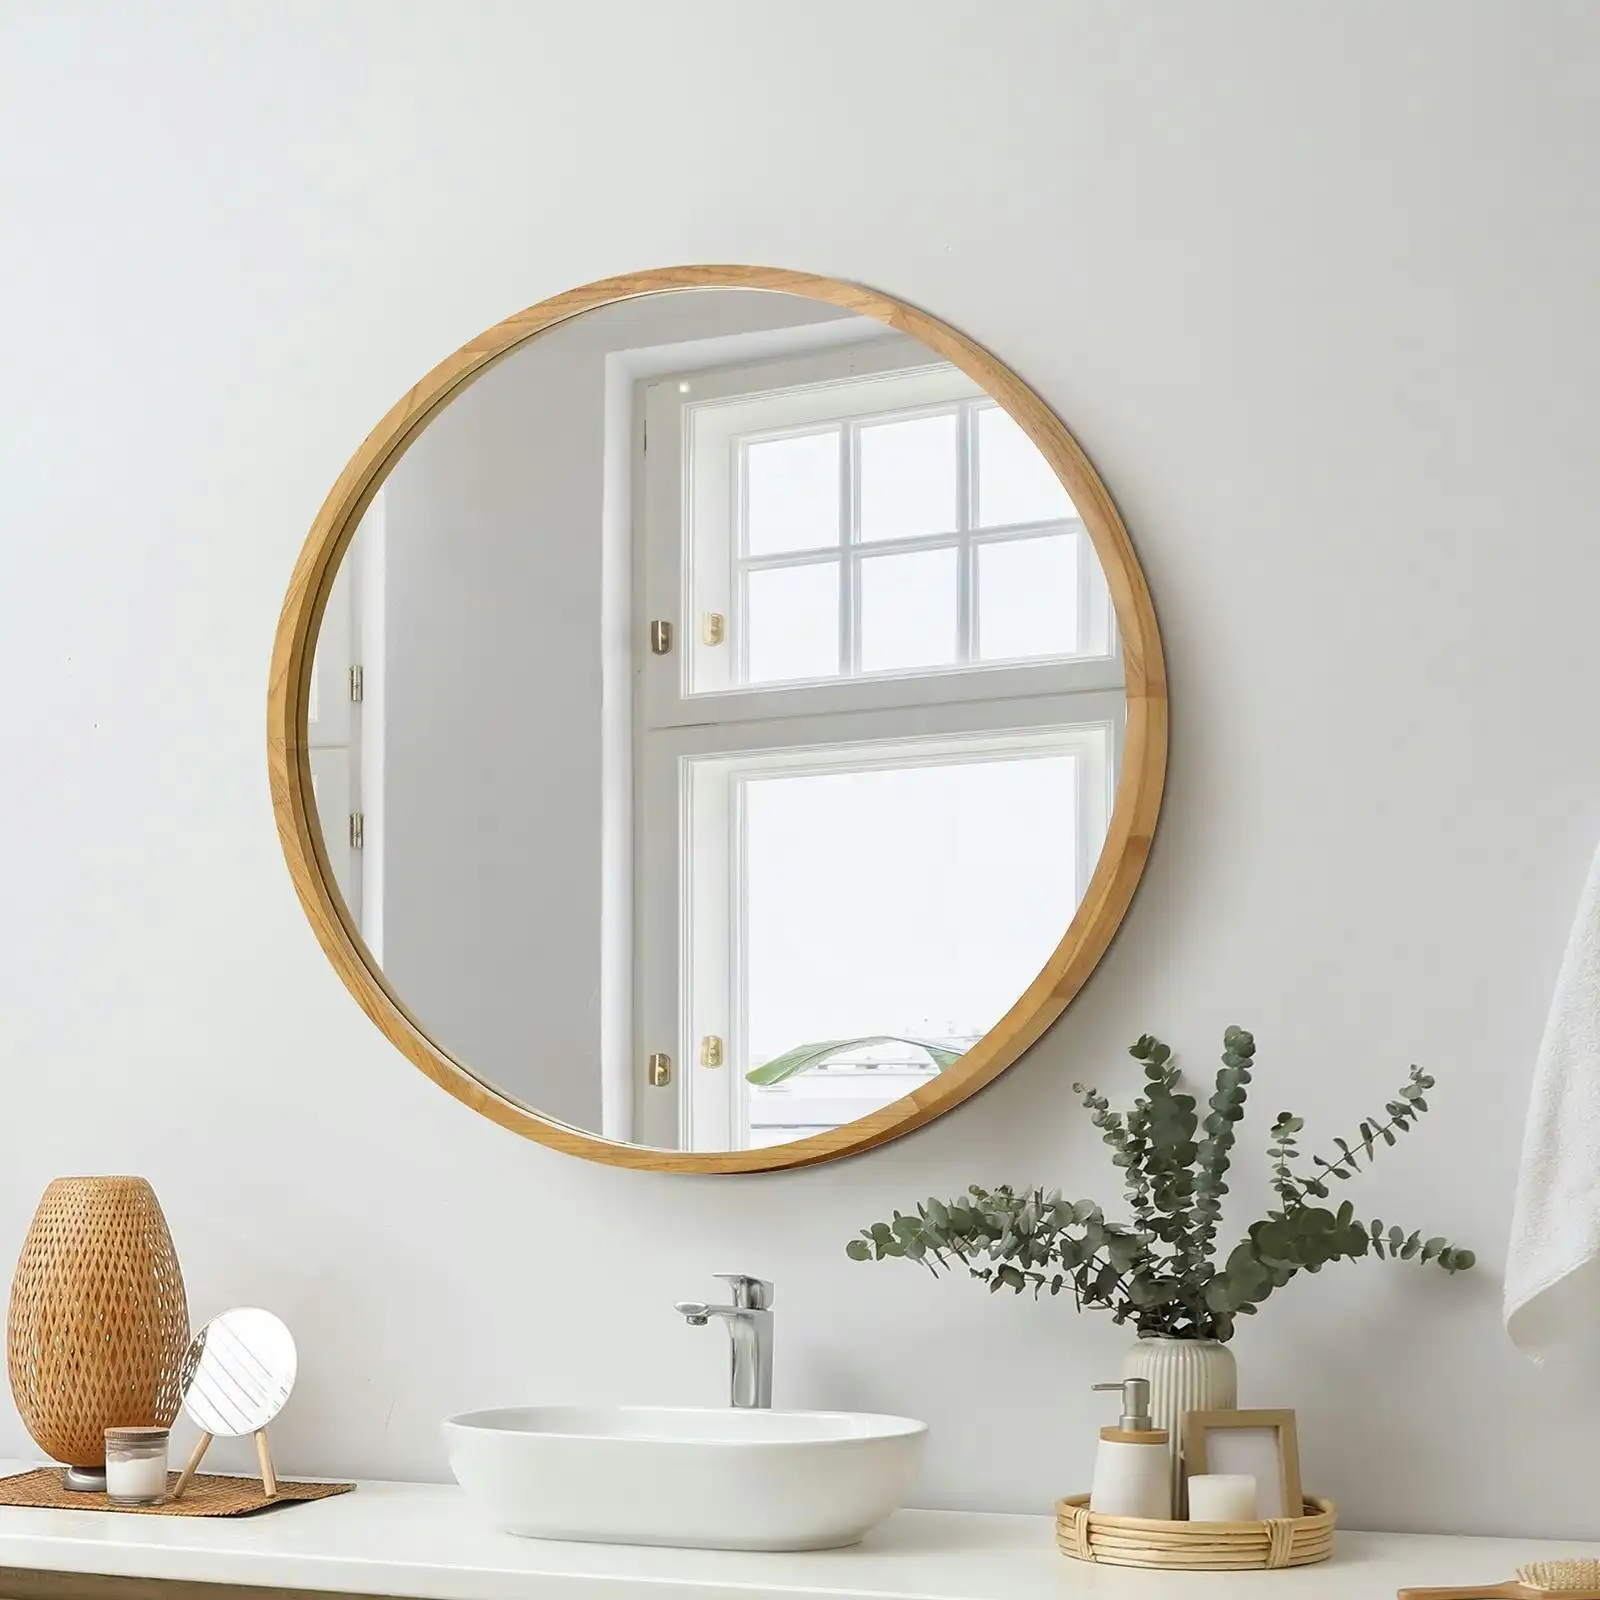 Oikiture 60cm Wall Mirrors Round Makeup Mirror Home Decor Wooden Dining Room